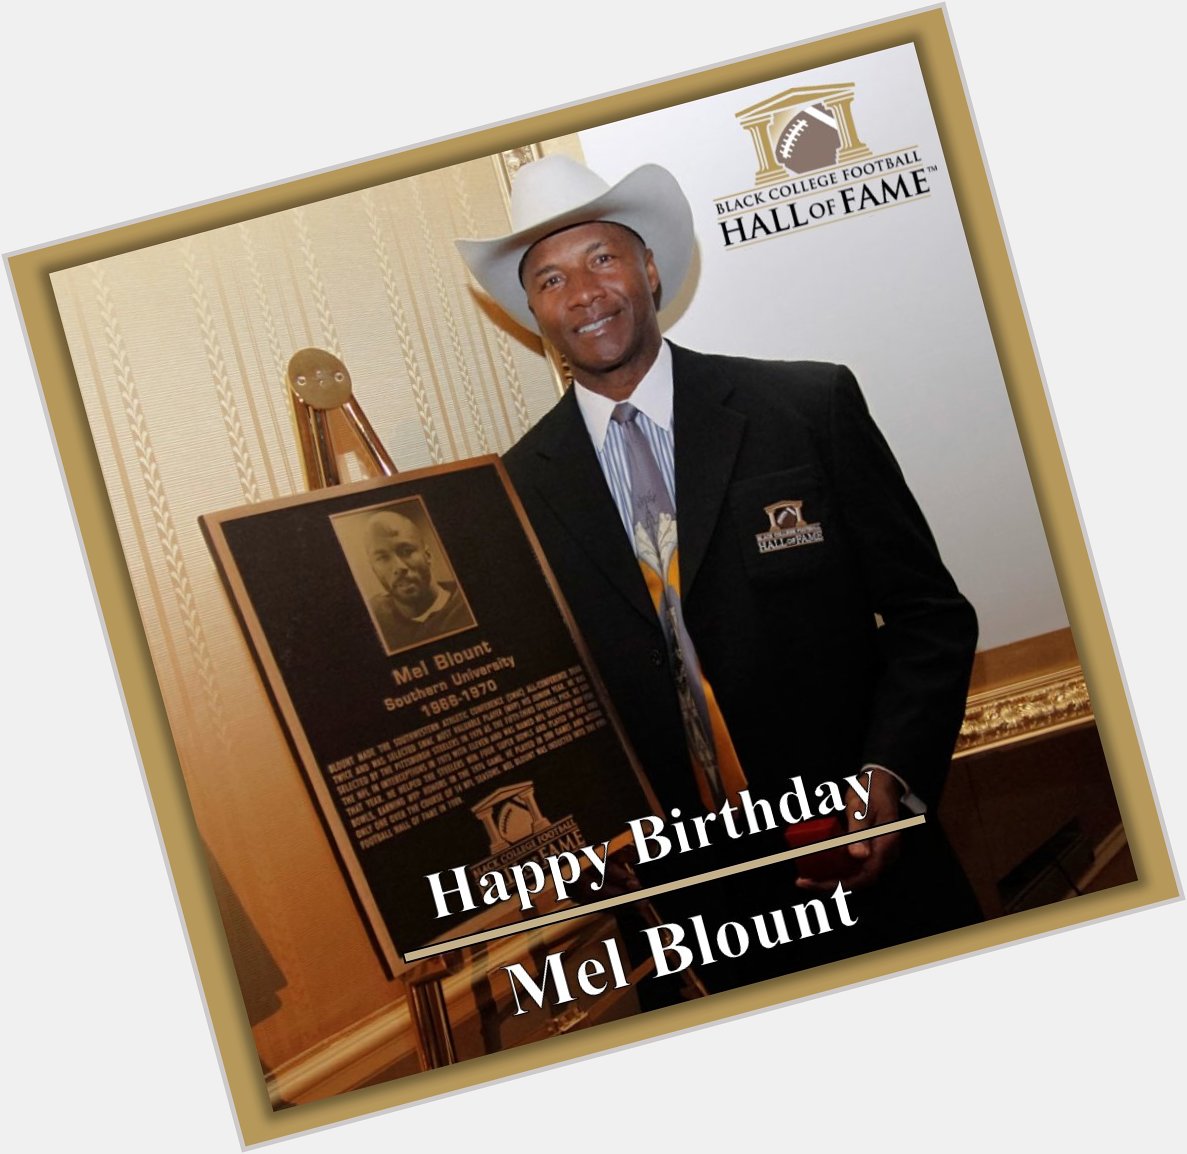 Happy birthday to Black College Football Hall of Fame Class of 2011 Inductee, Mel Blount!

 